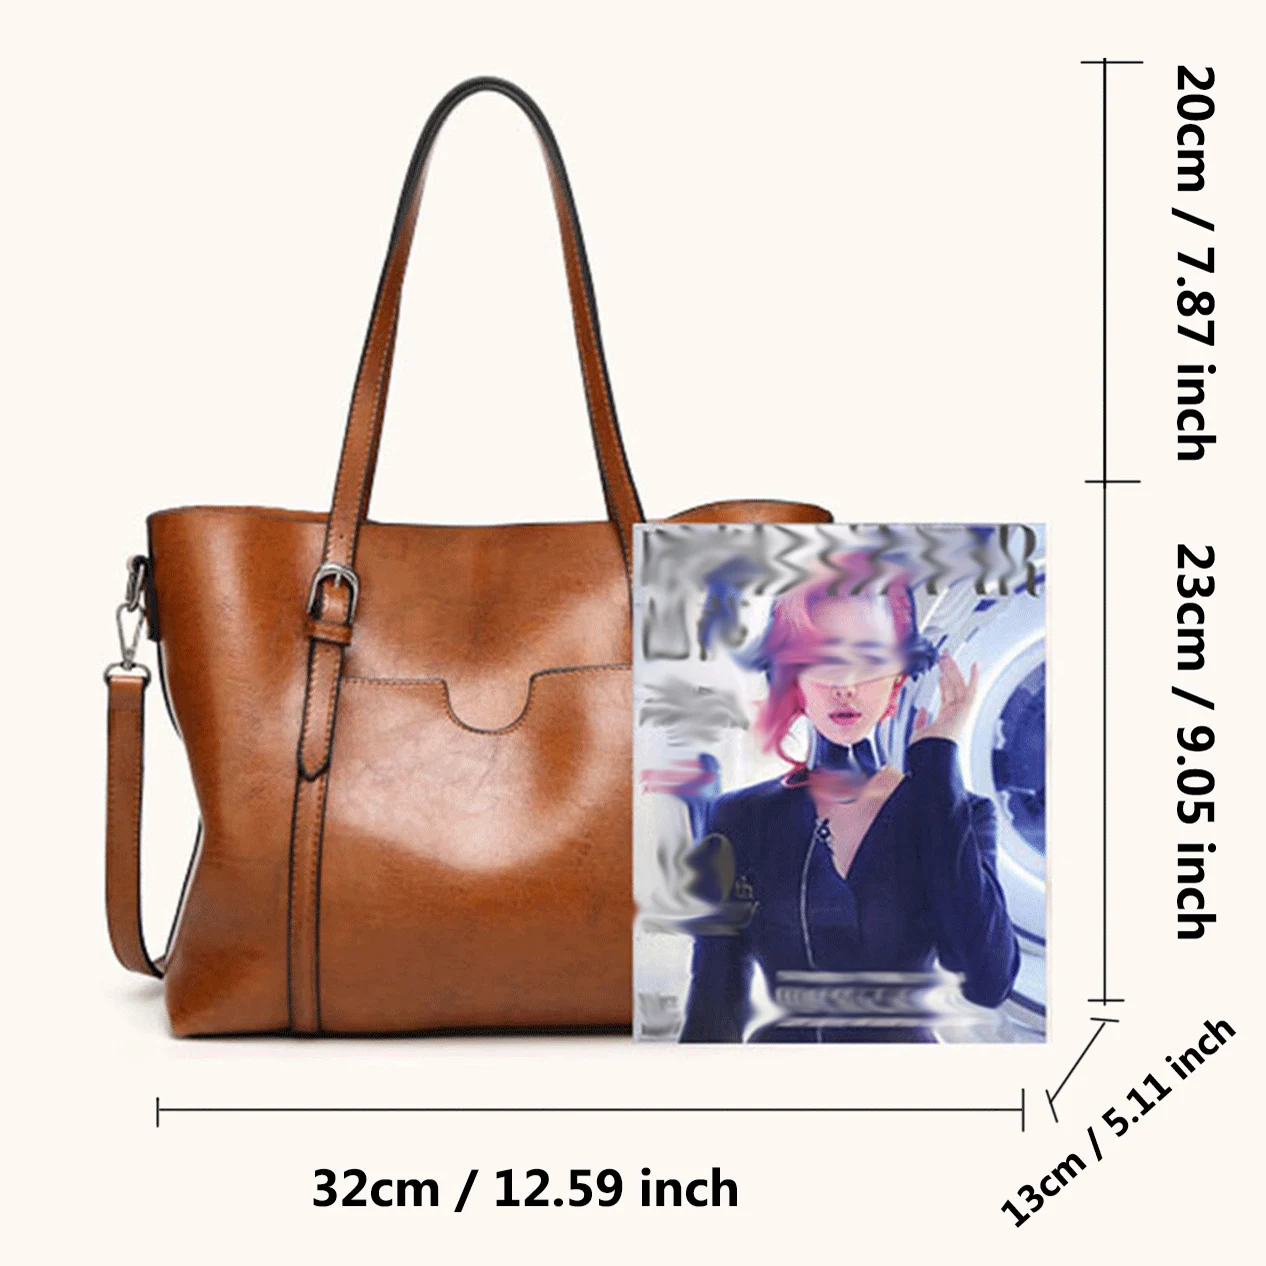 New Design Ladies Hand Bags 2020-2021/Best Hand Bag Ideas And Styles/Trendy  Bags 